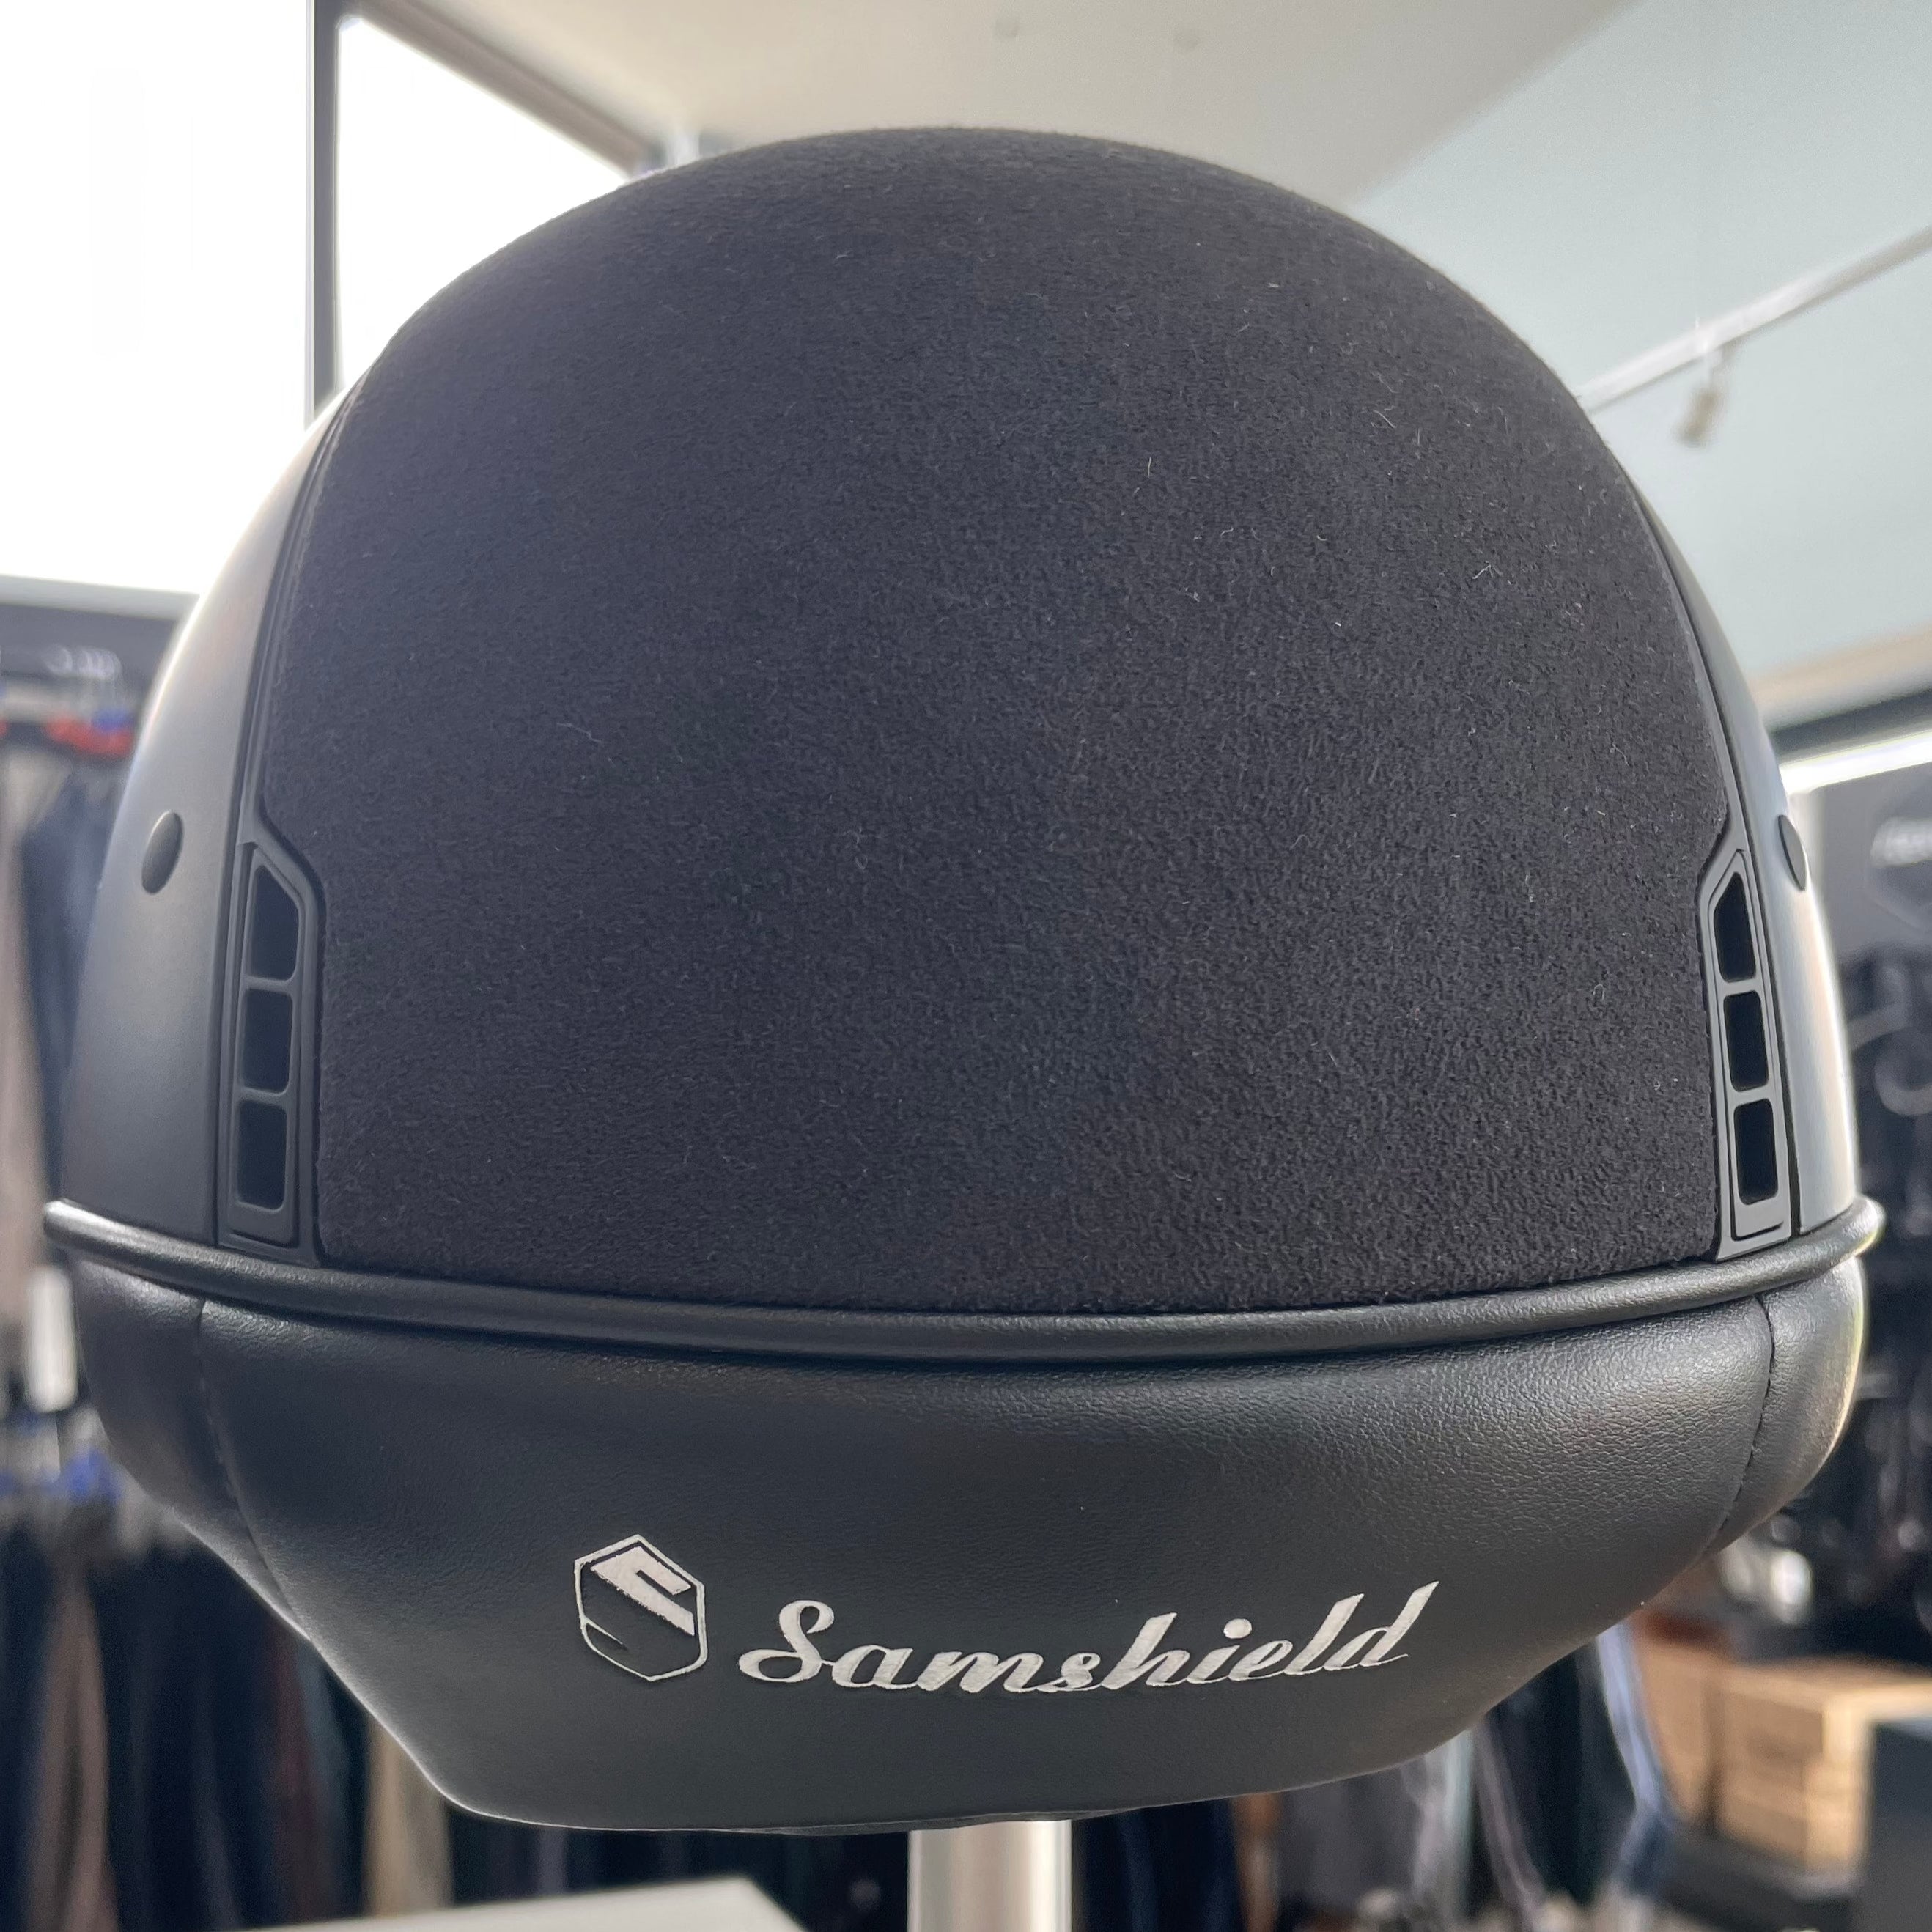 Samshield MissShield 1.0 *LIMITED EDITION*Black S- in stock and ready to ship!